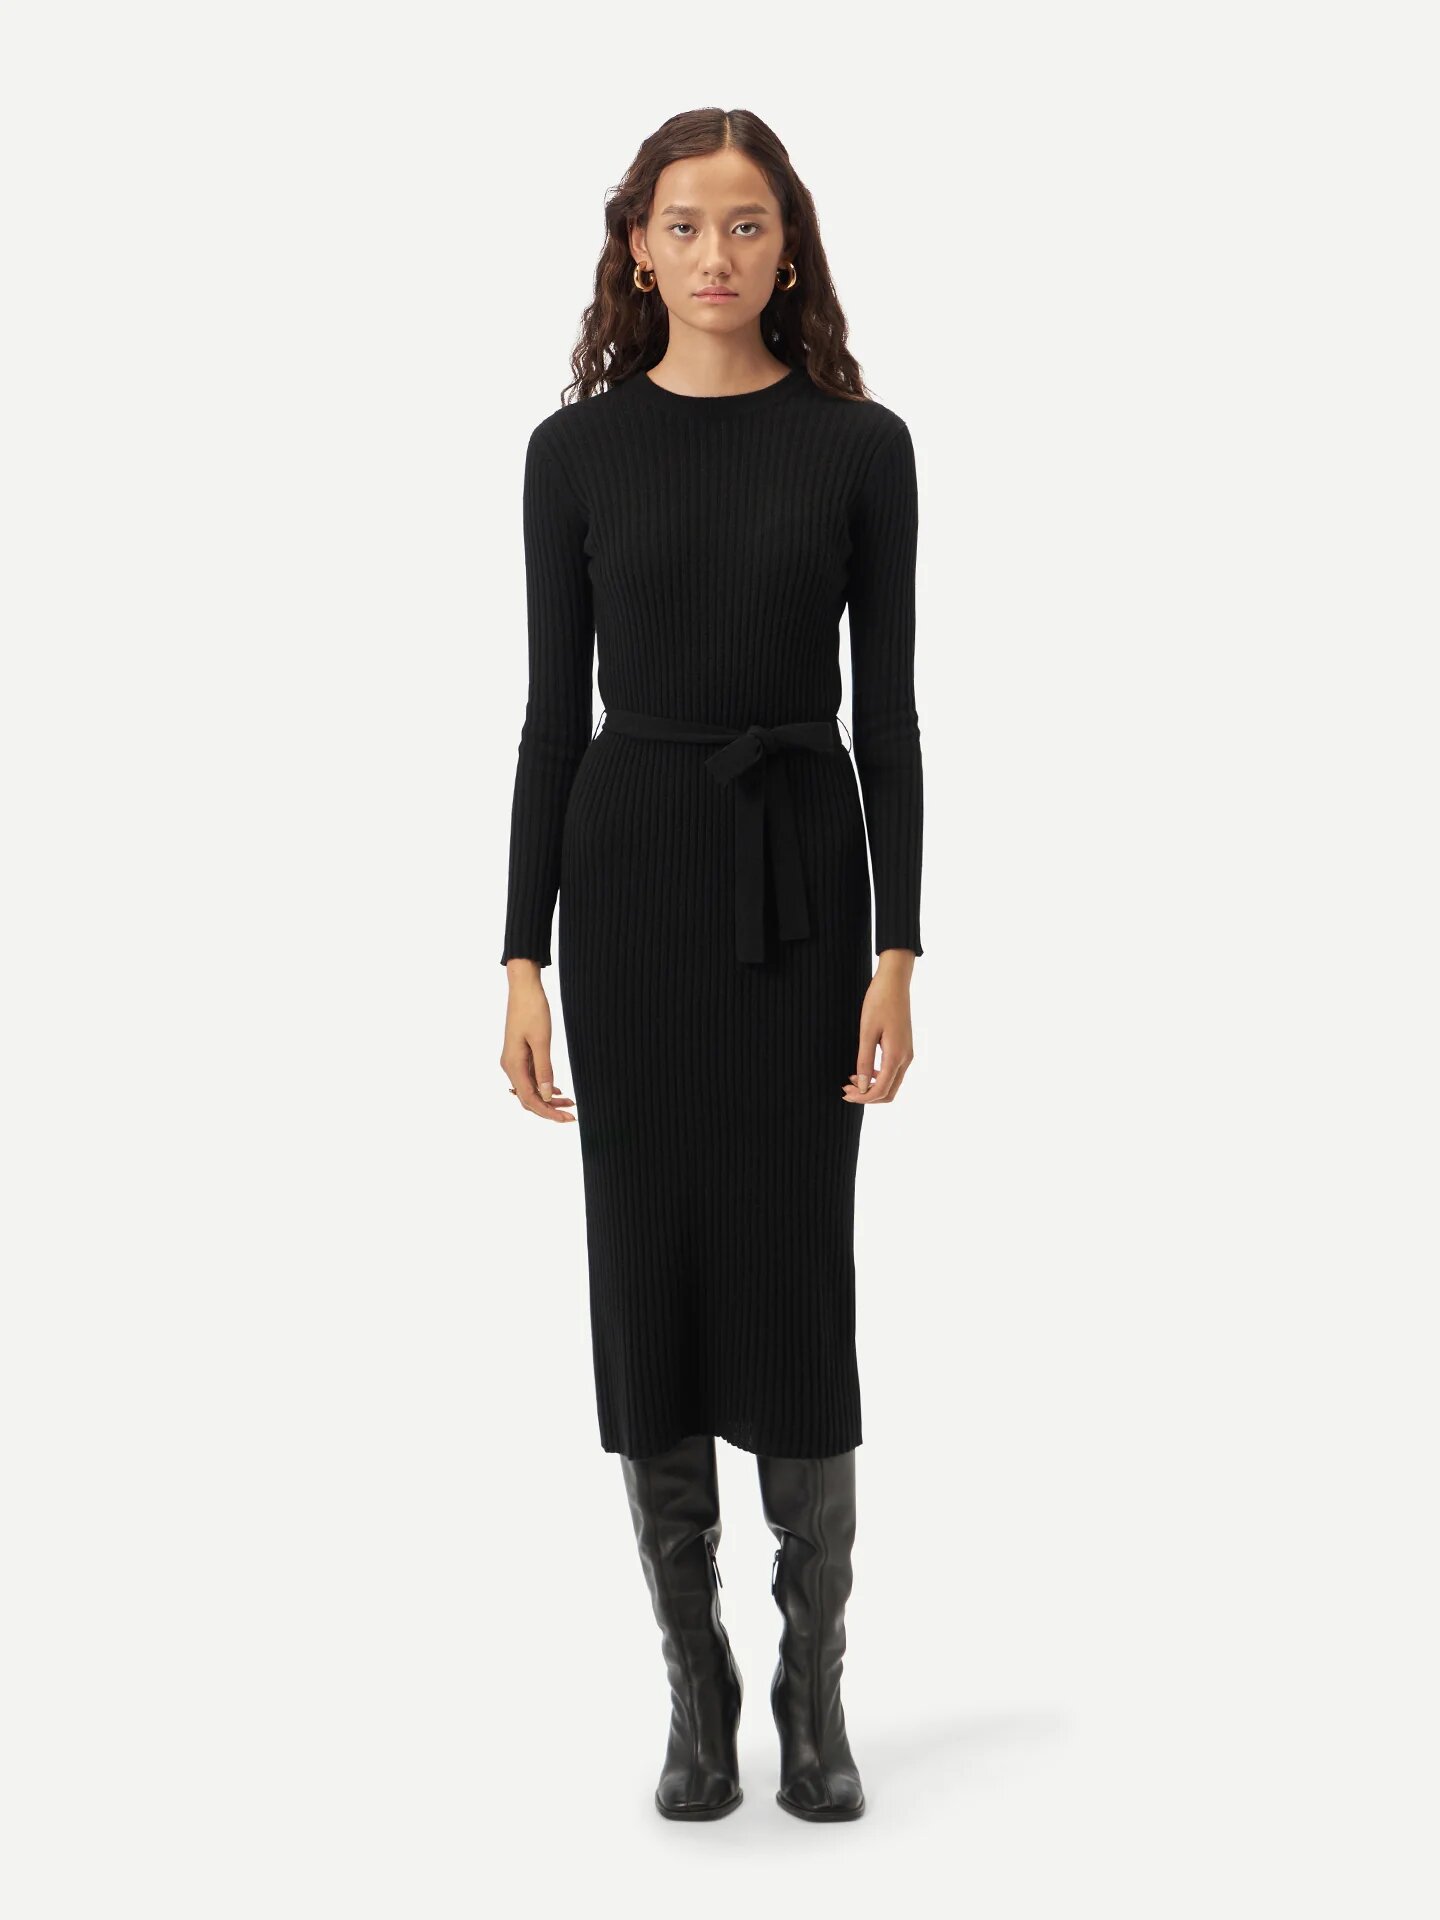 Cashmere Knit Dress with Belt $349 Shipped